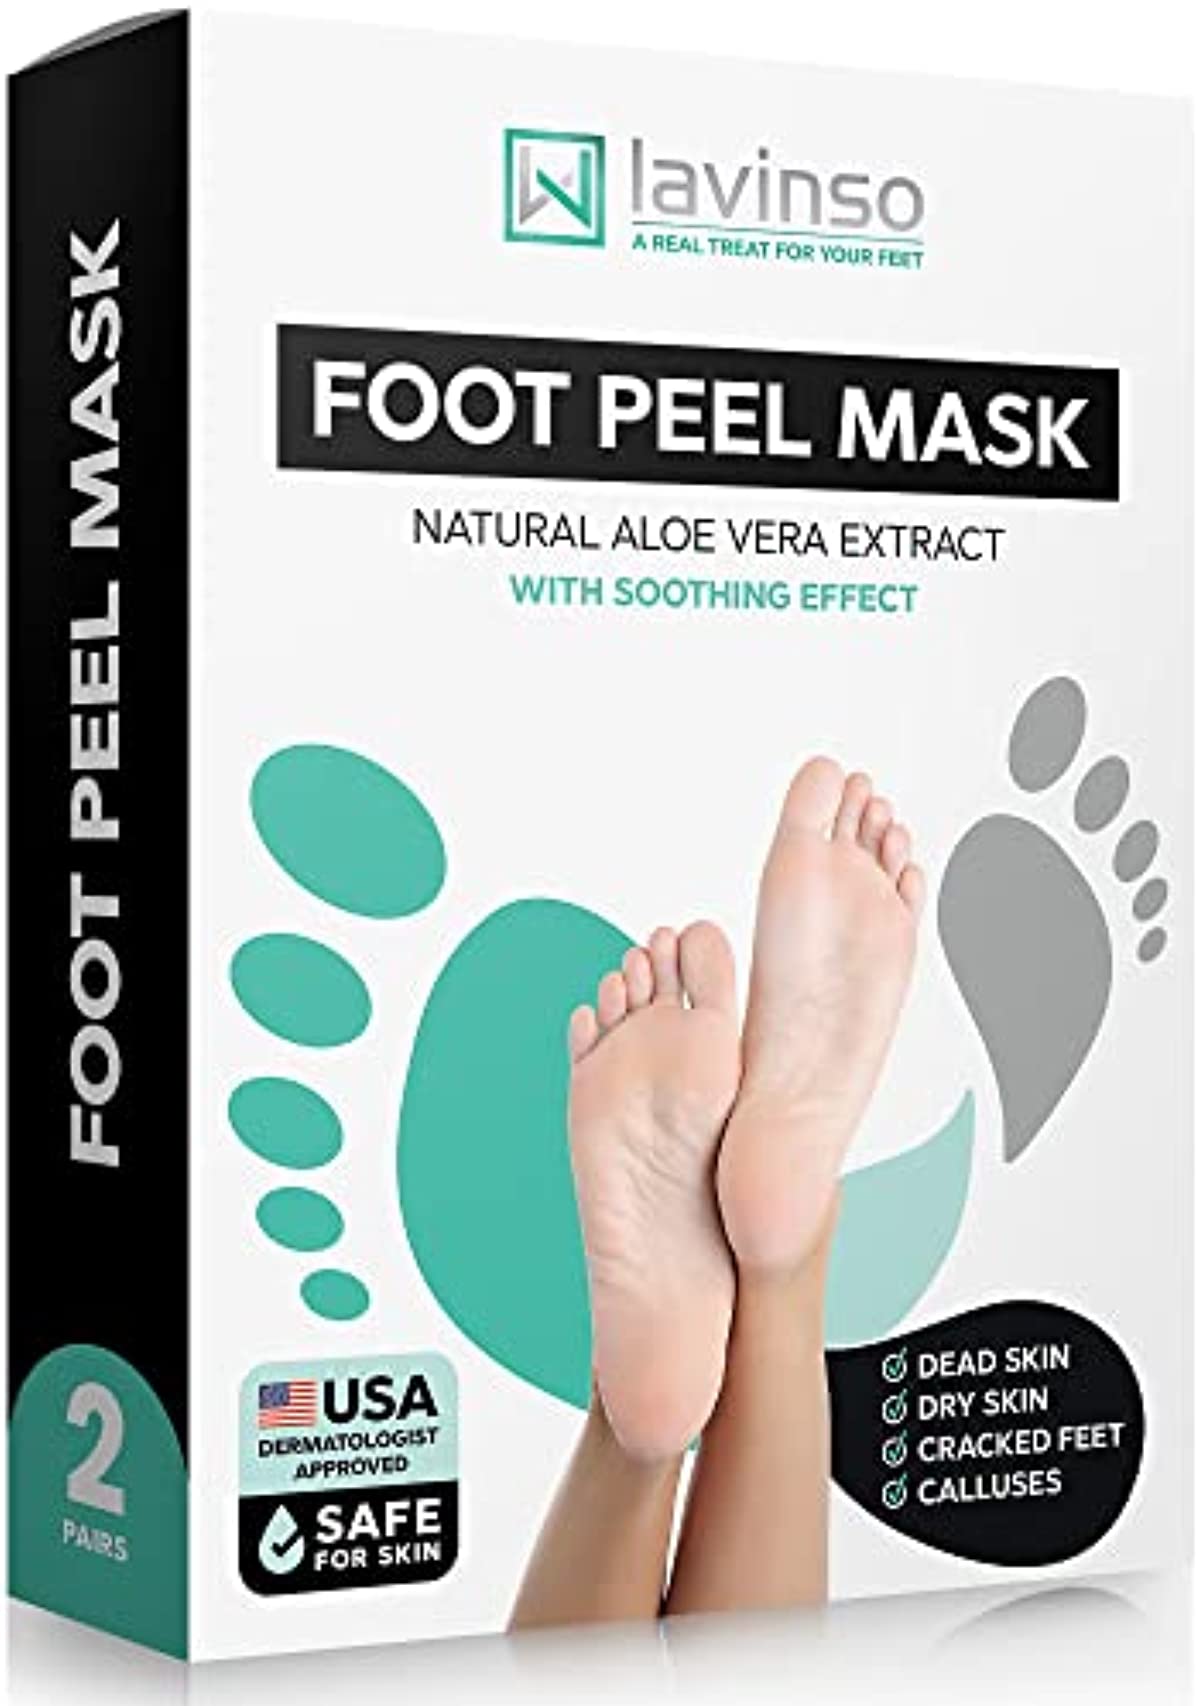 Foot Peel Mask for Dry Cracked Feet - Remove Dead Skin and Calluses - Make Your Feet Baby Soft - Exfoliating Peeling Foot Mask Natural Treatment - Repair Rough Heels - by Lavinso